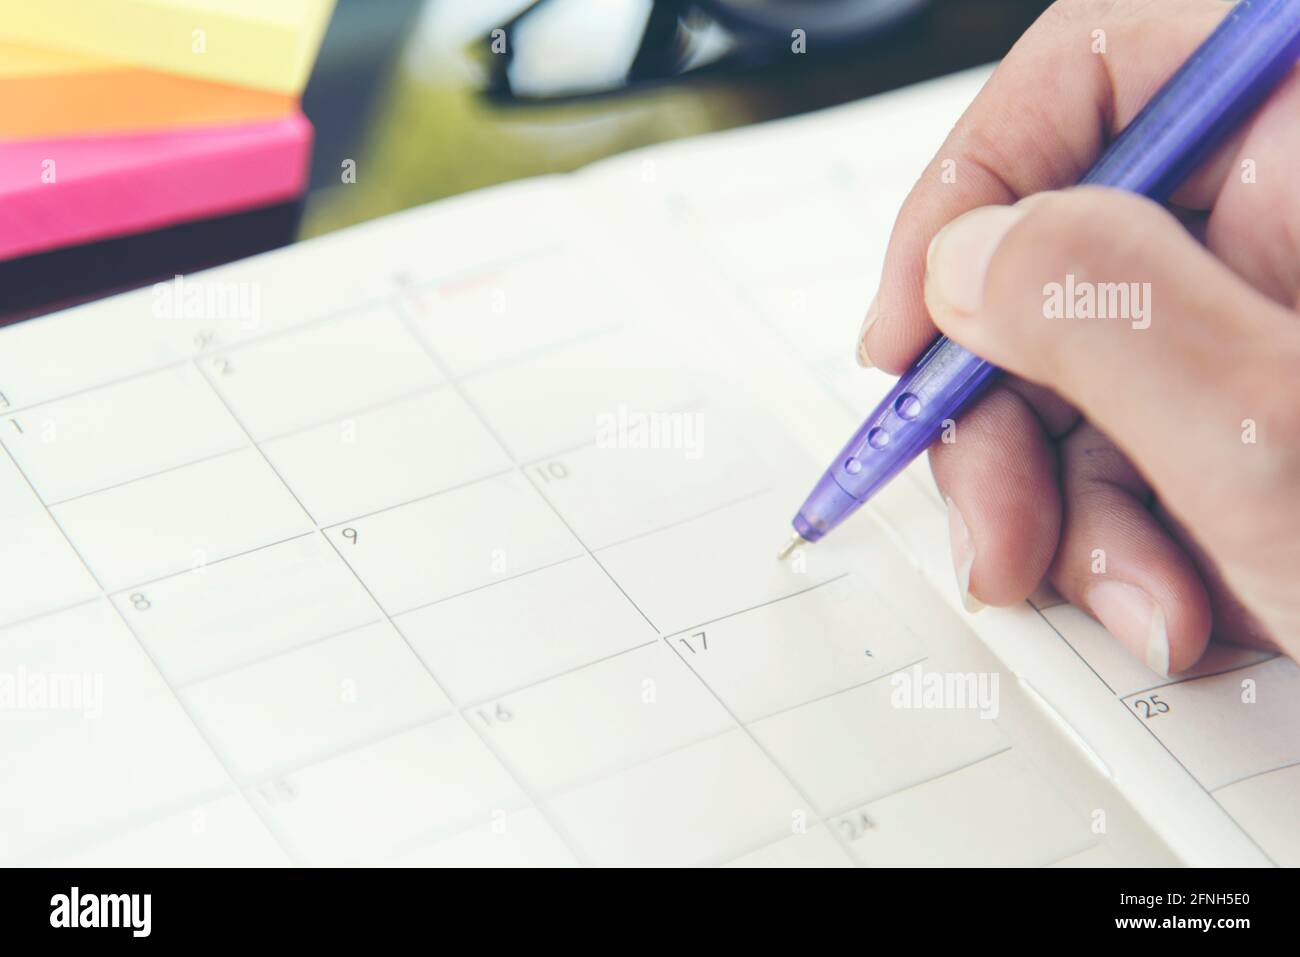 2018 Calendar Event Planner is busy. Businesswoman always Planning Agenda and Schedule using calendar,clock to set timetable organize schedule. Woman Stock Photo